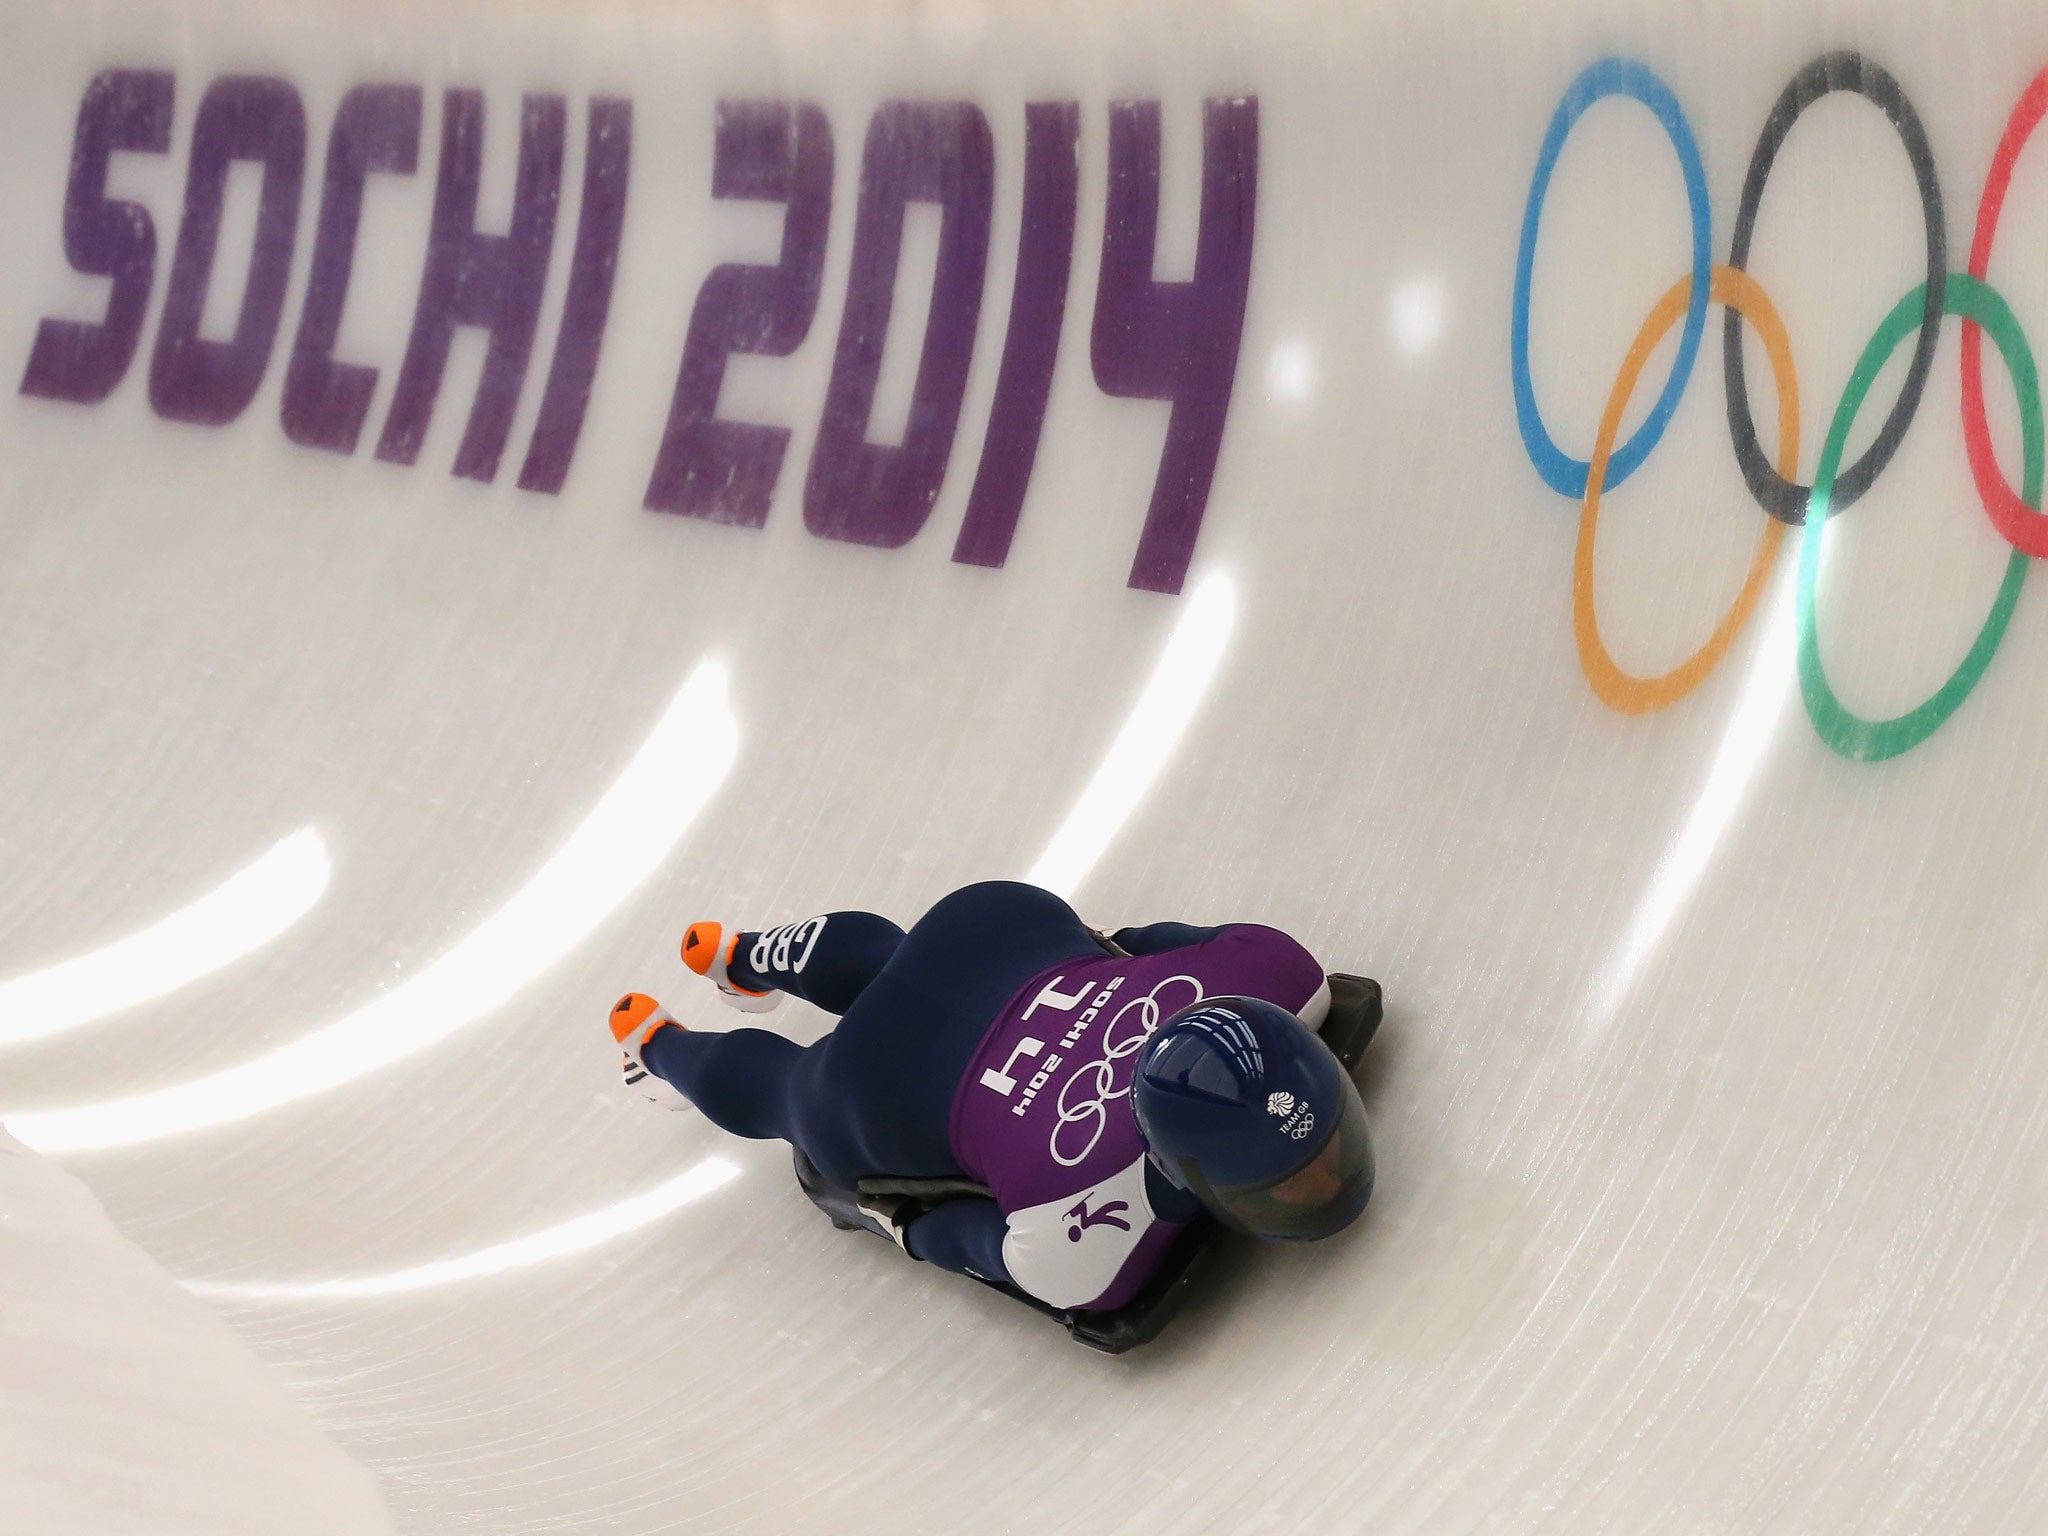 Lizzy Yarnold pictured practicing at the Games